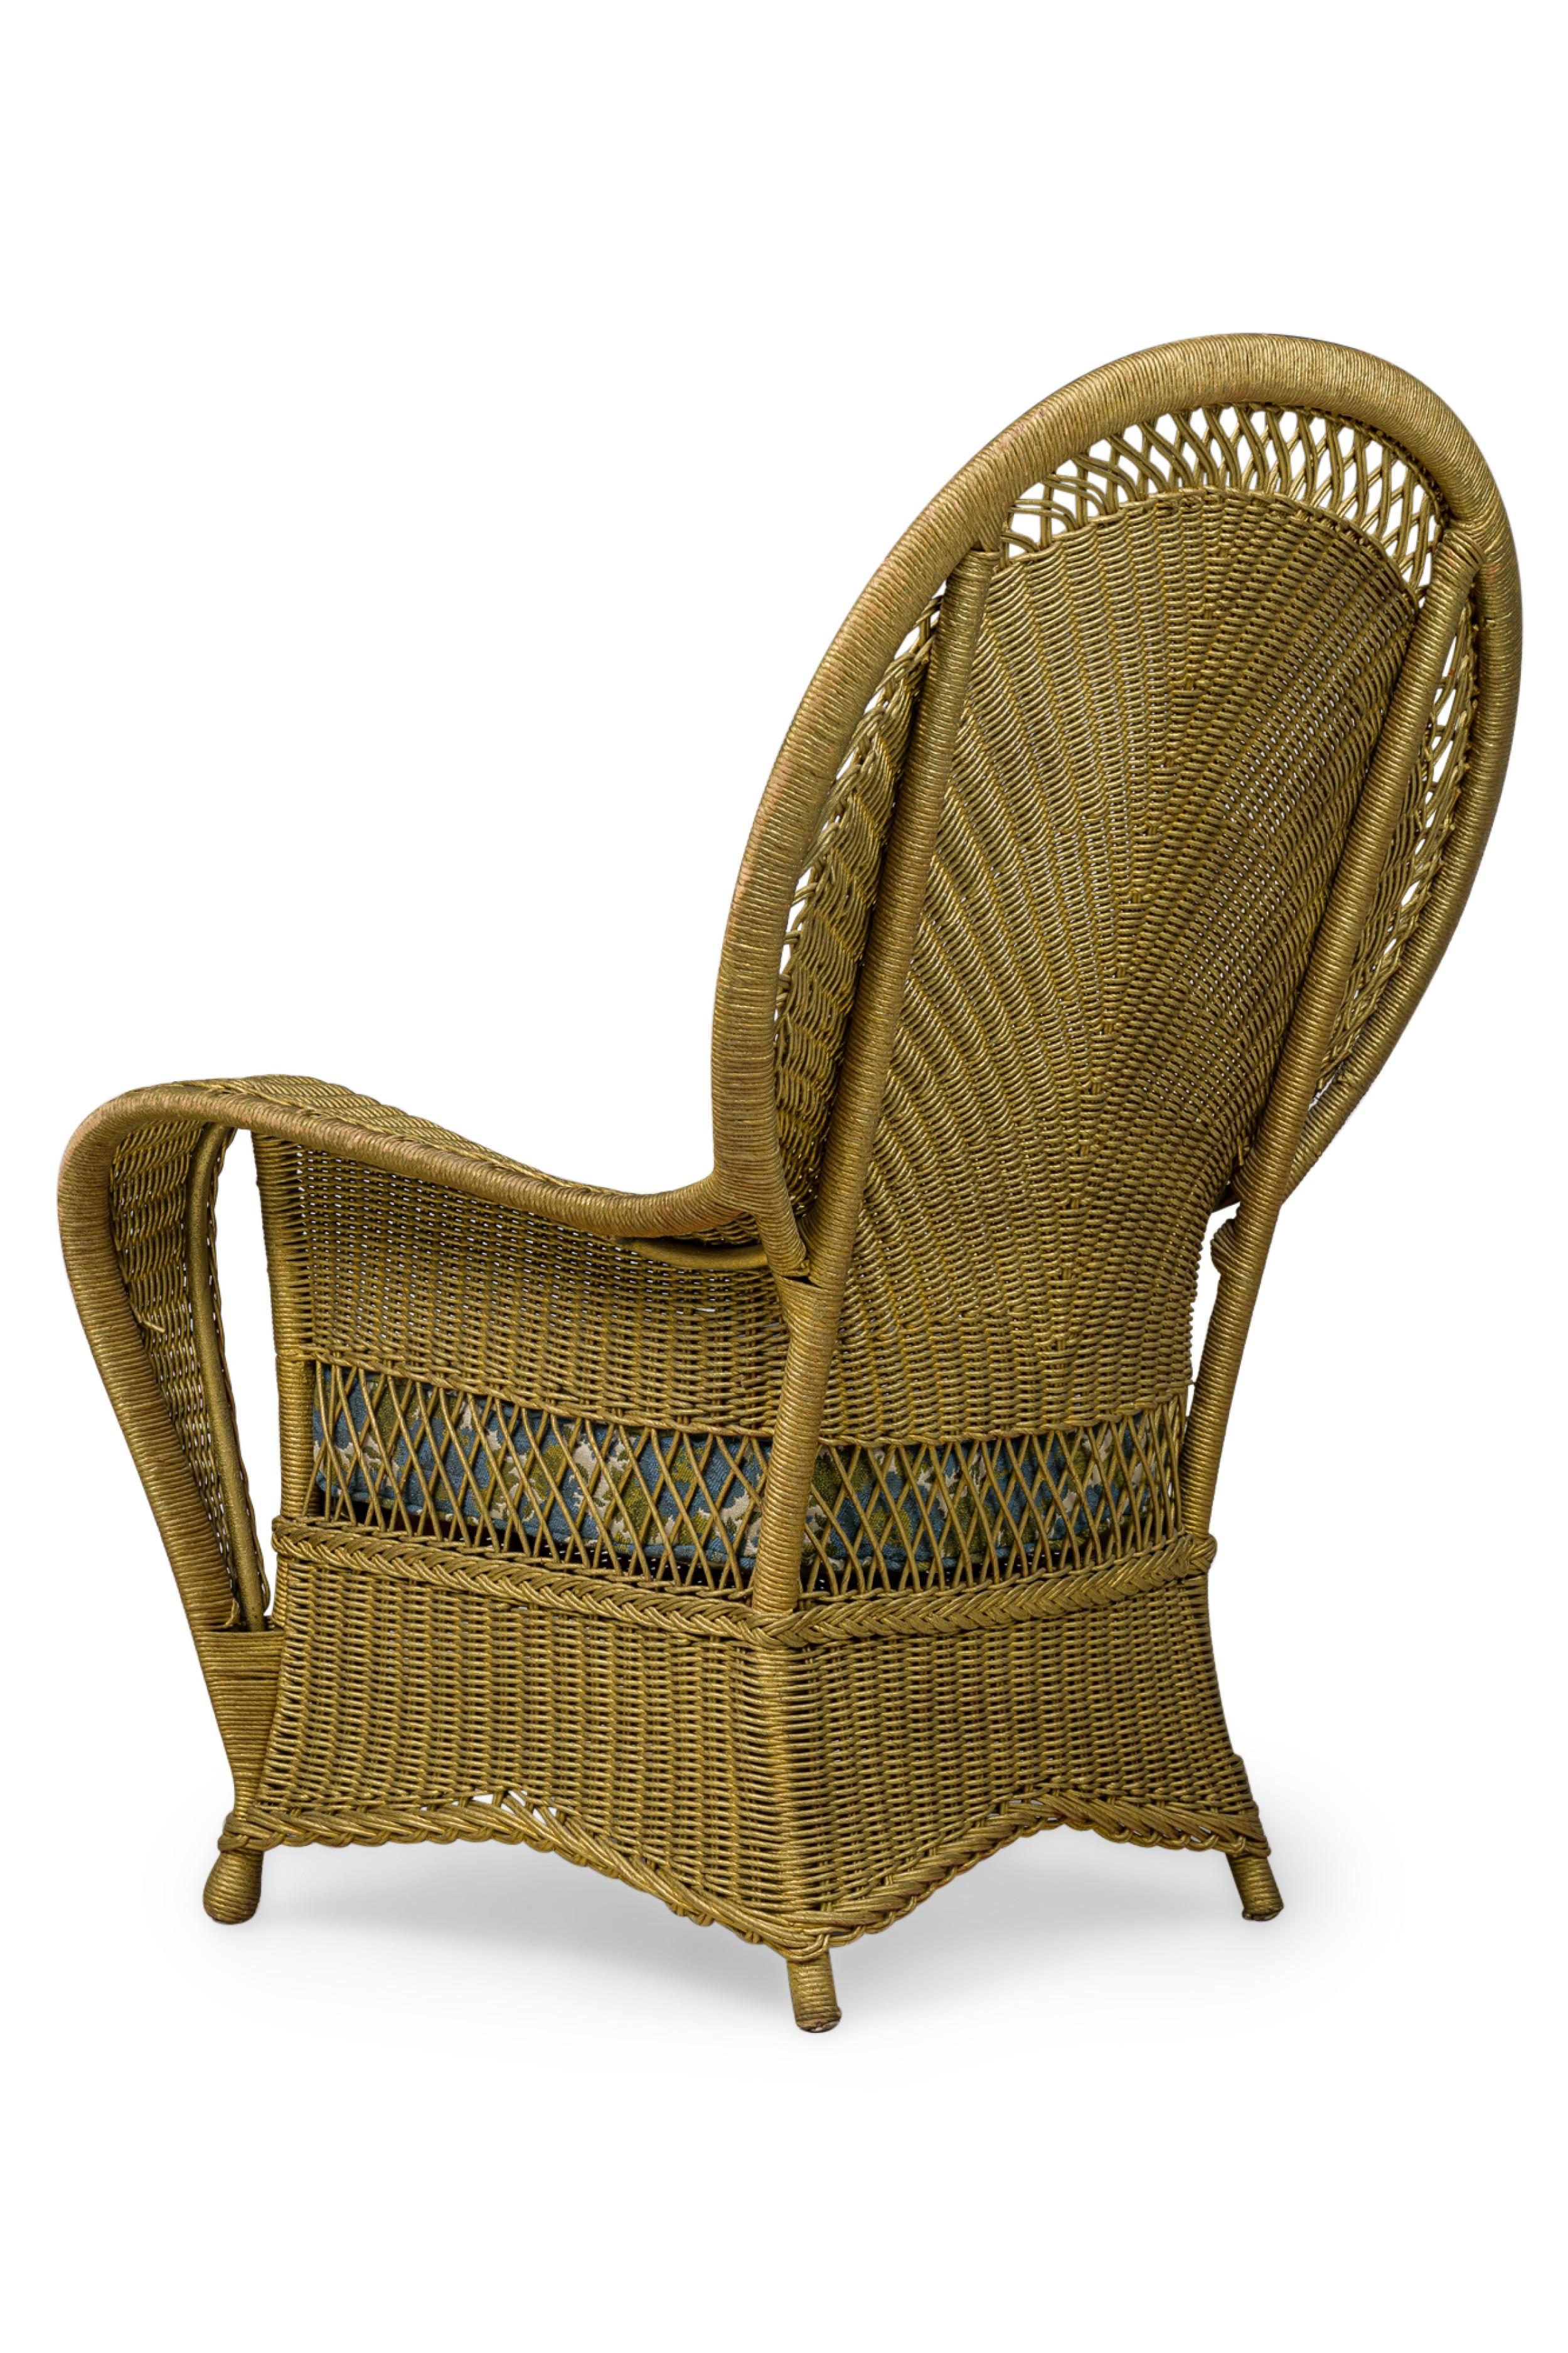 Pair of Similar Art Deco Gold Painted Paper Cord Wicker Armchairs For Sale 4